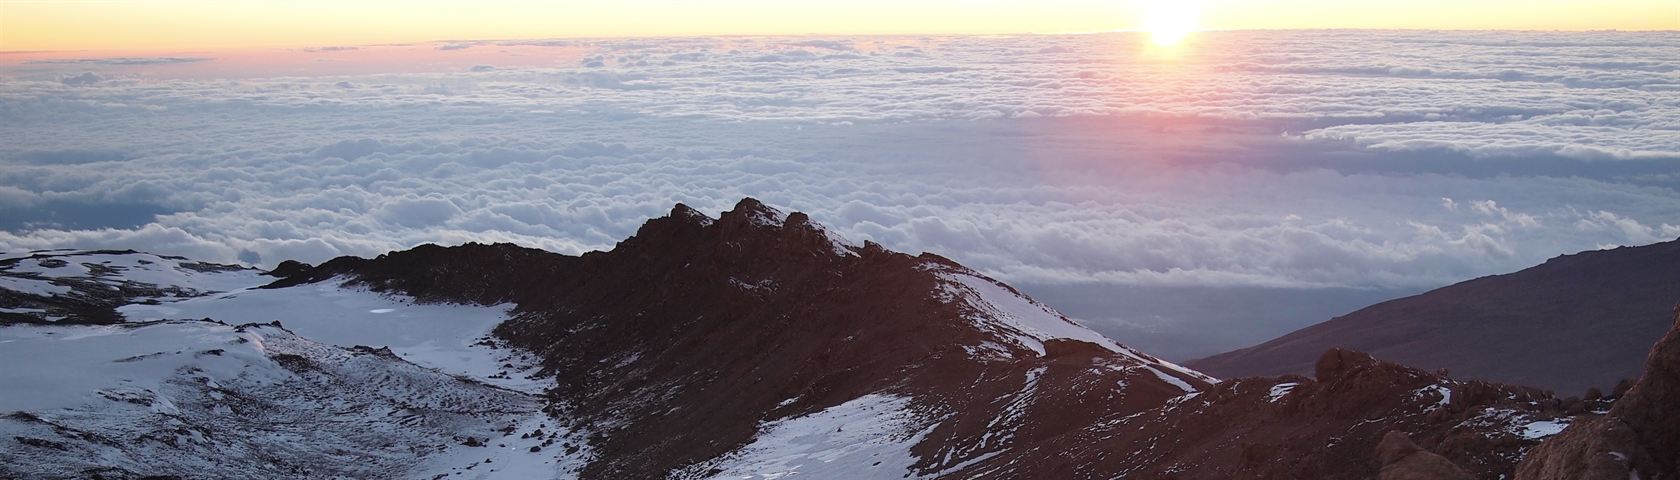 Sunset over the Kilimanjaro Crater